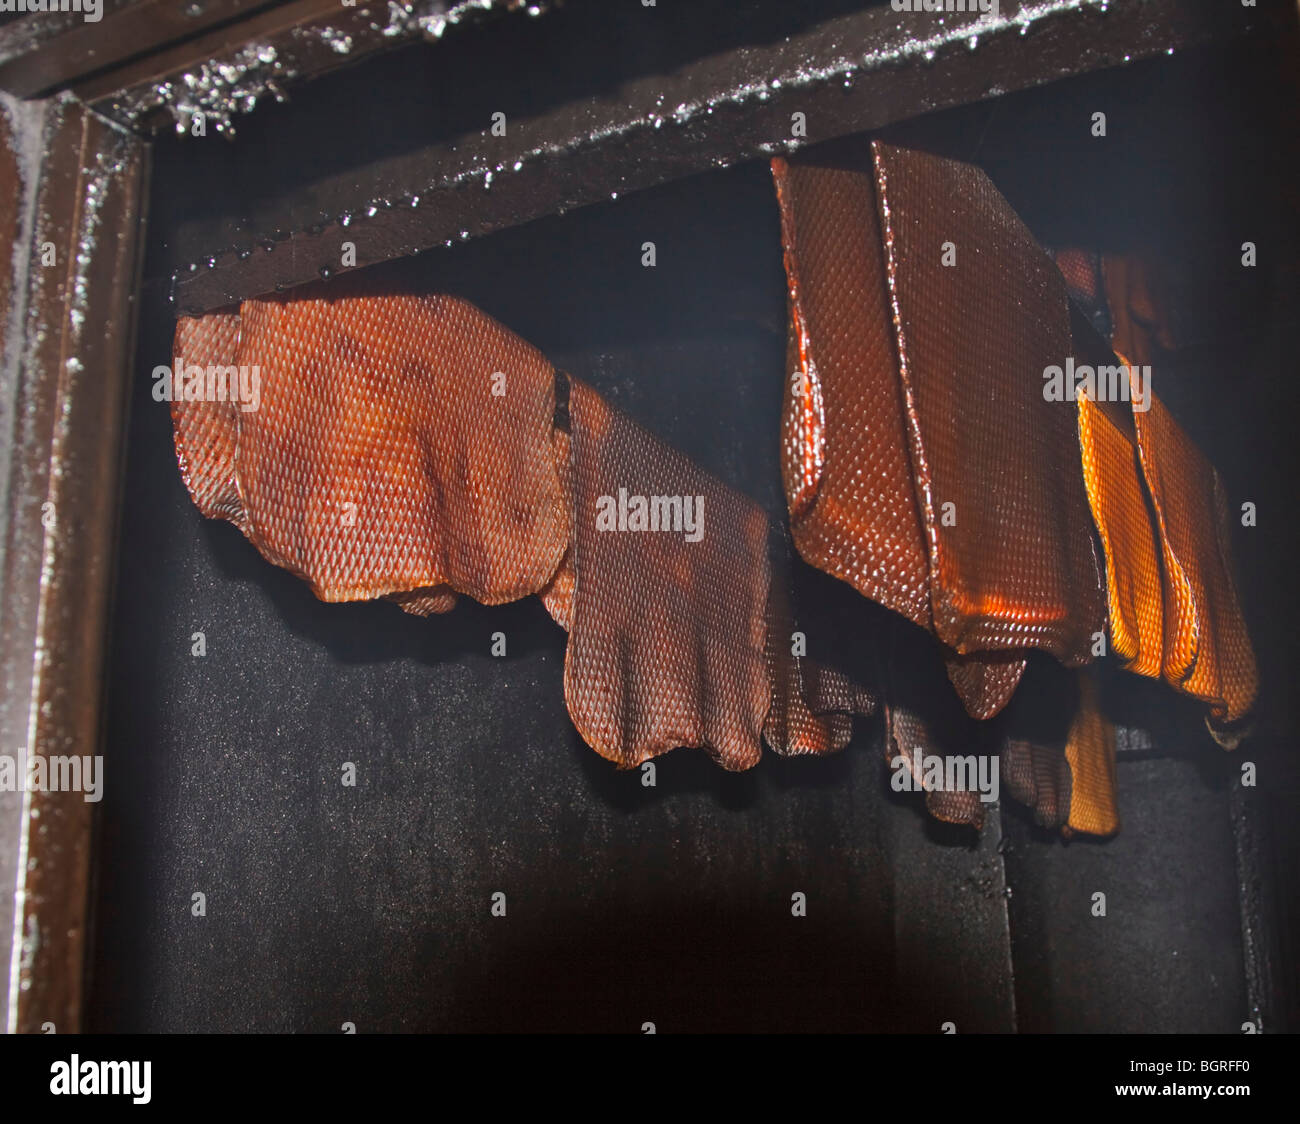 Sheets of latex (natural) rubber hanging in a smokehouse. Stock Photo